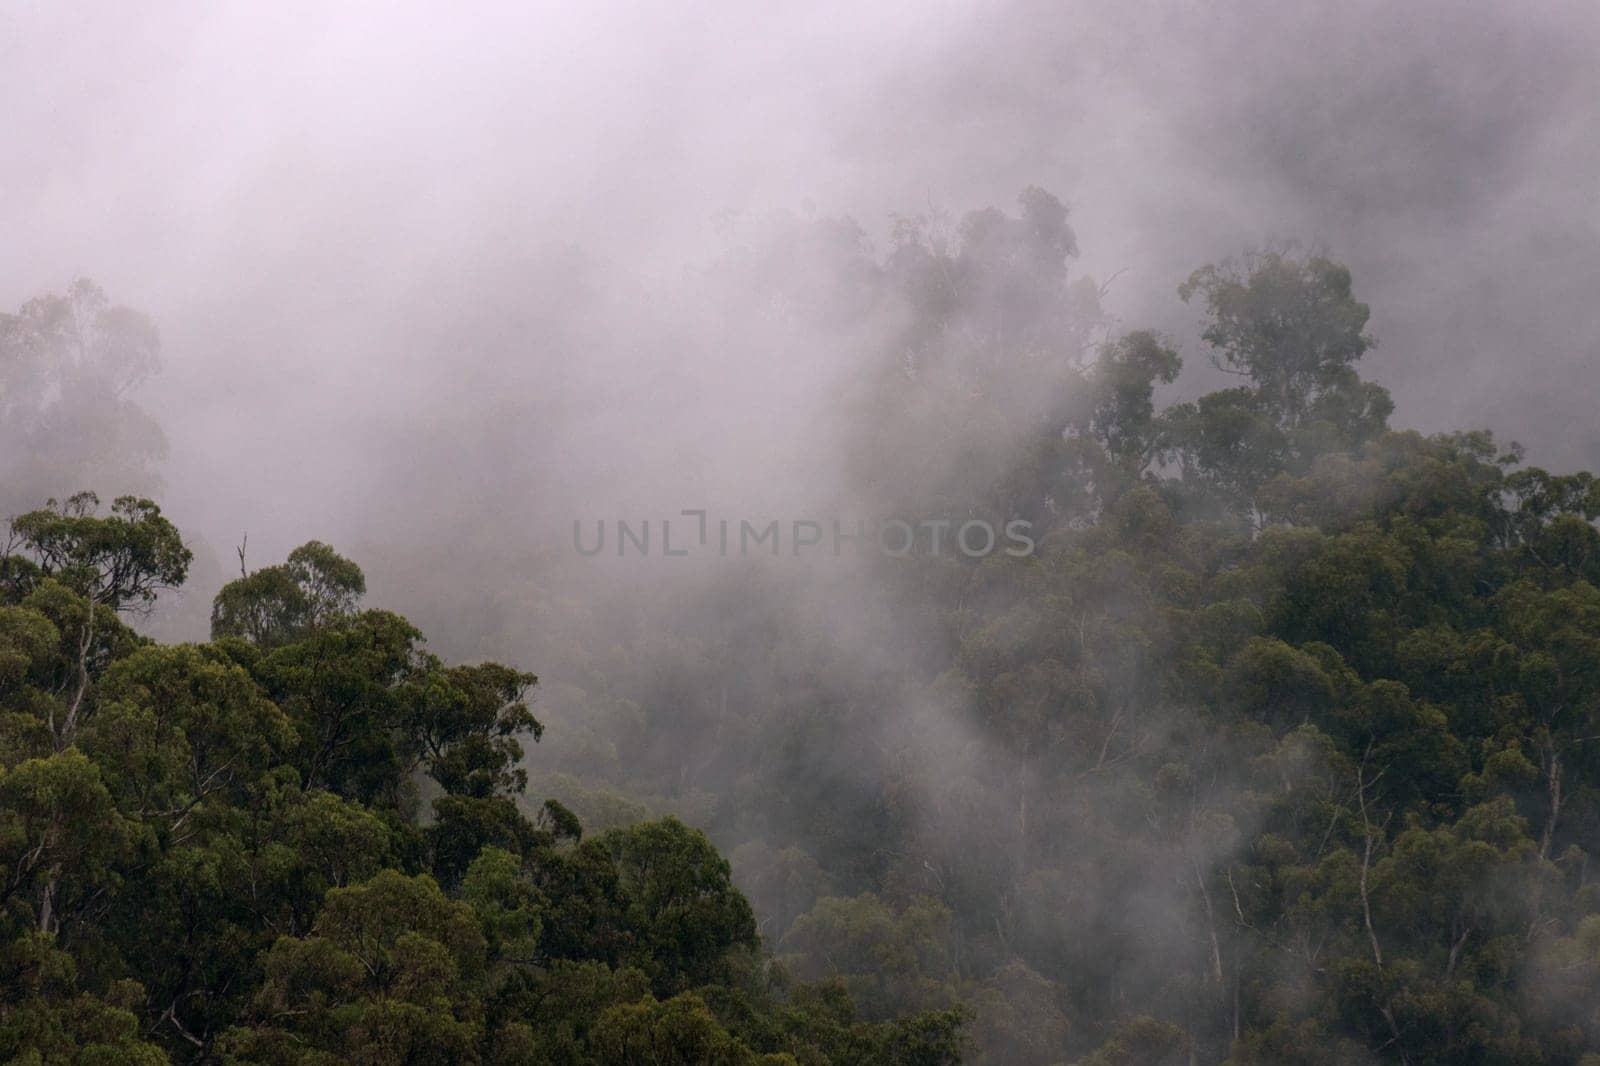 Fog and morning mist touch the treetops from a mountaintop, illuminated by rays of sunlight.